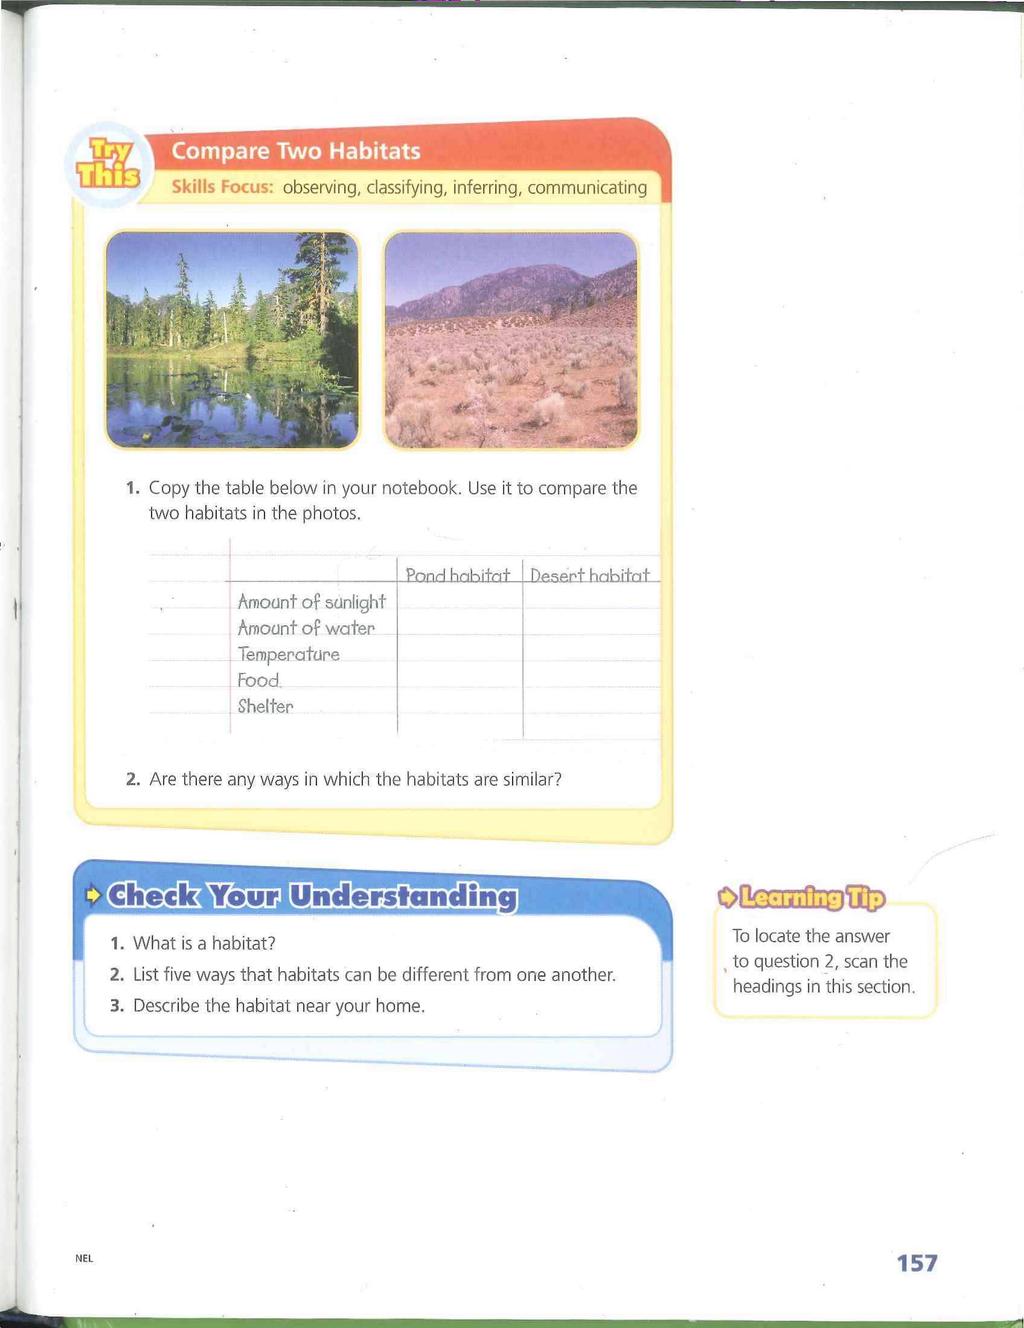 Compare Two Habitats observing, classifying, inferring, communicating 1. Copy the table below in your notebook. Use it to compare the two habitats in the photos.